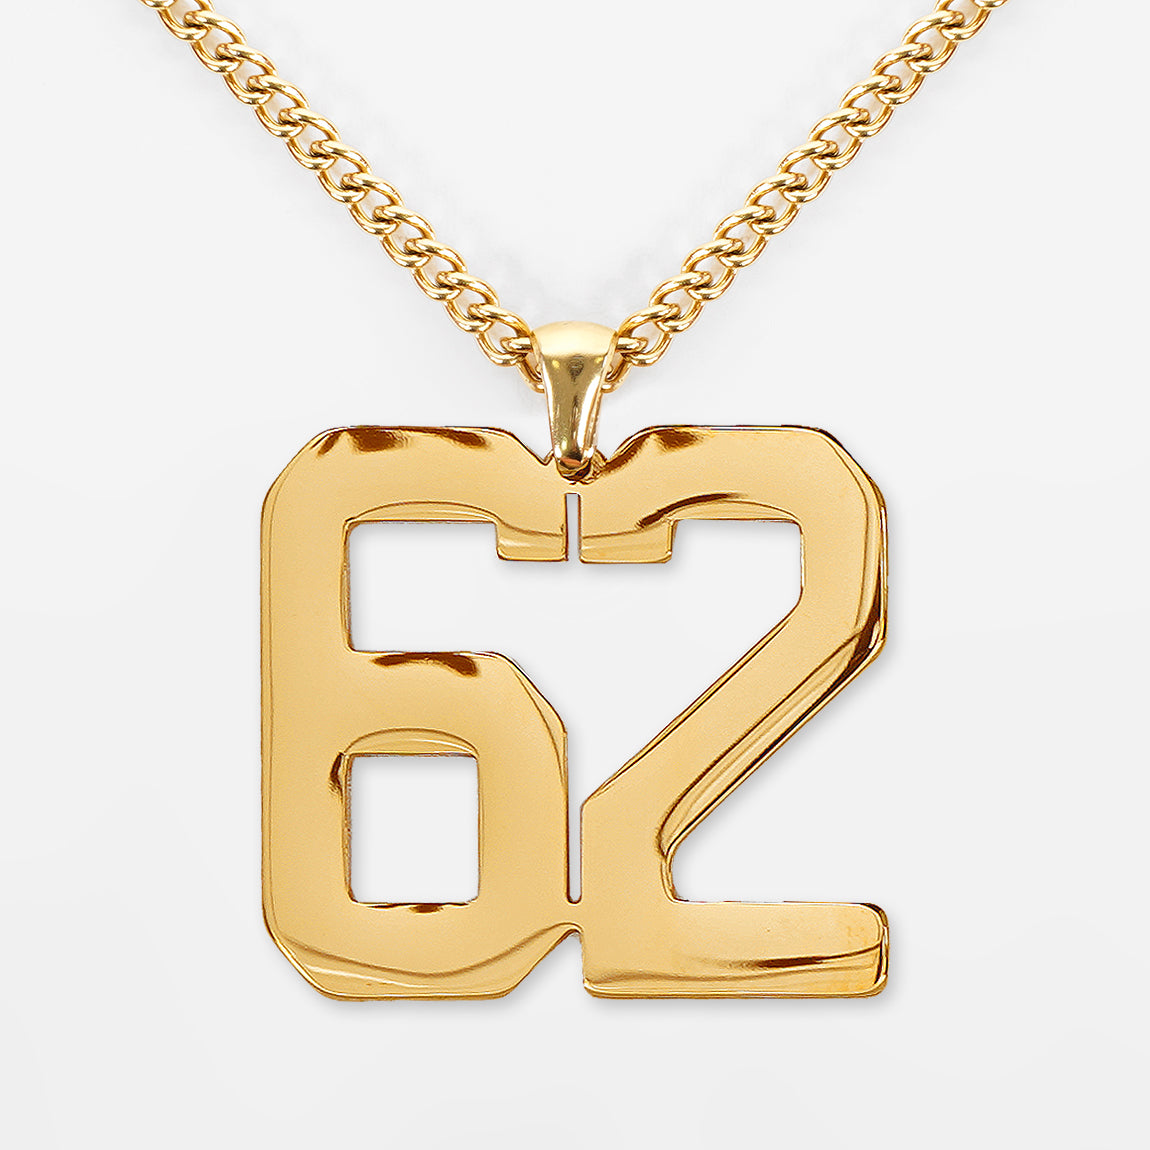 62 Number Pendant with Chain Necklace - Gold Plated Stainless Steel